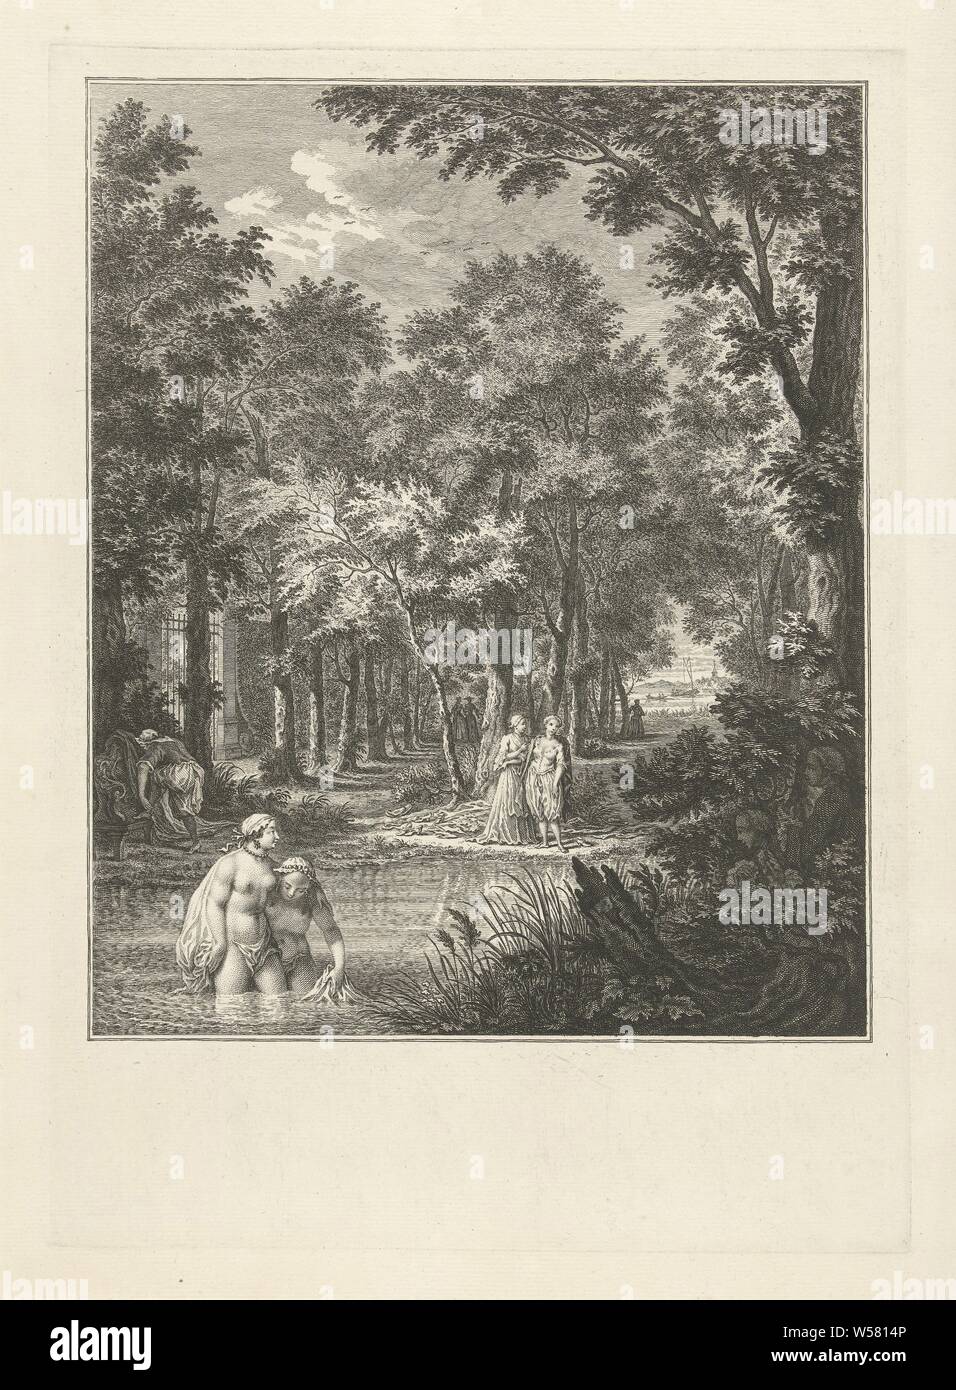 The bathing ladies are spied, Two bathing ladies are spied on by two gentlemen in the scrub. In the background a few figures walk among the trees., Washing and bathing, peeping, voyeur, Simon Fokke, Amsterdam, 1722 - 1784, paper, etching, h 379 mm × w 269 mm Stock Photo